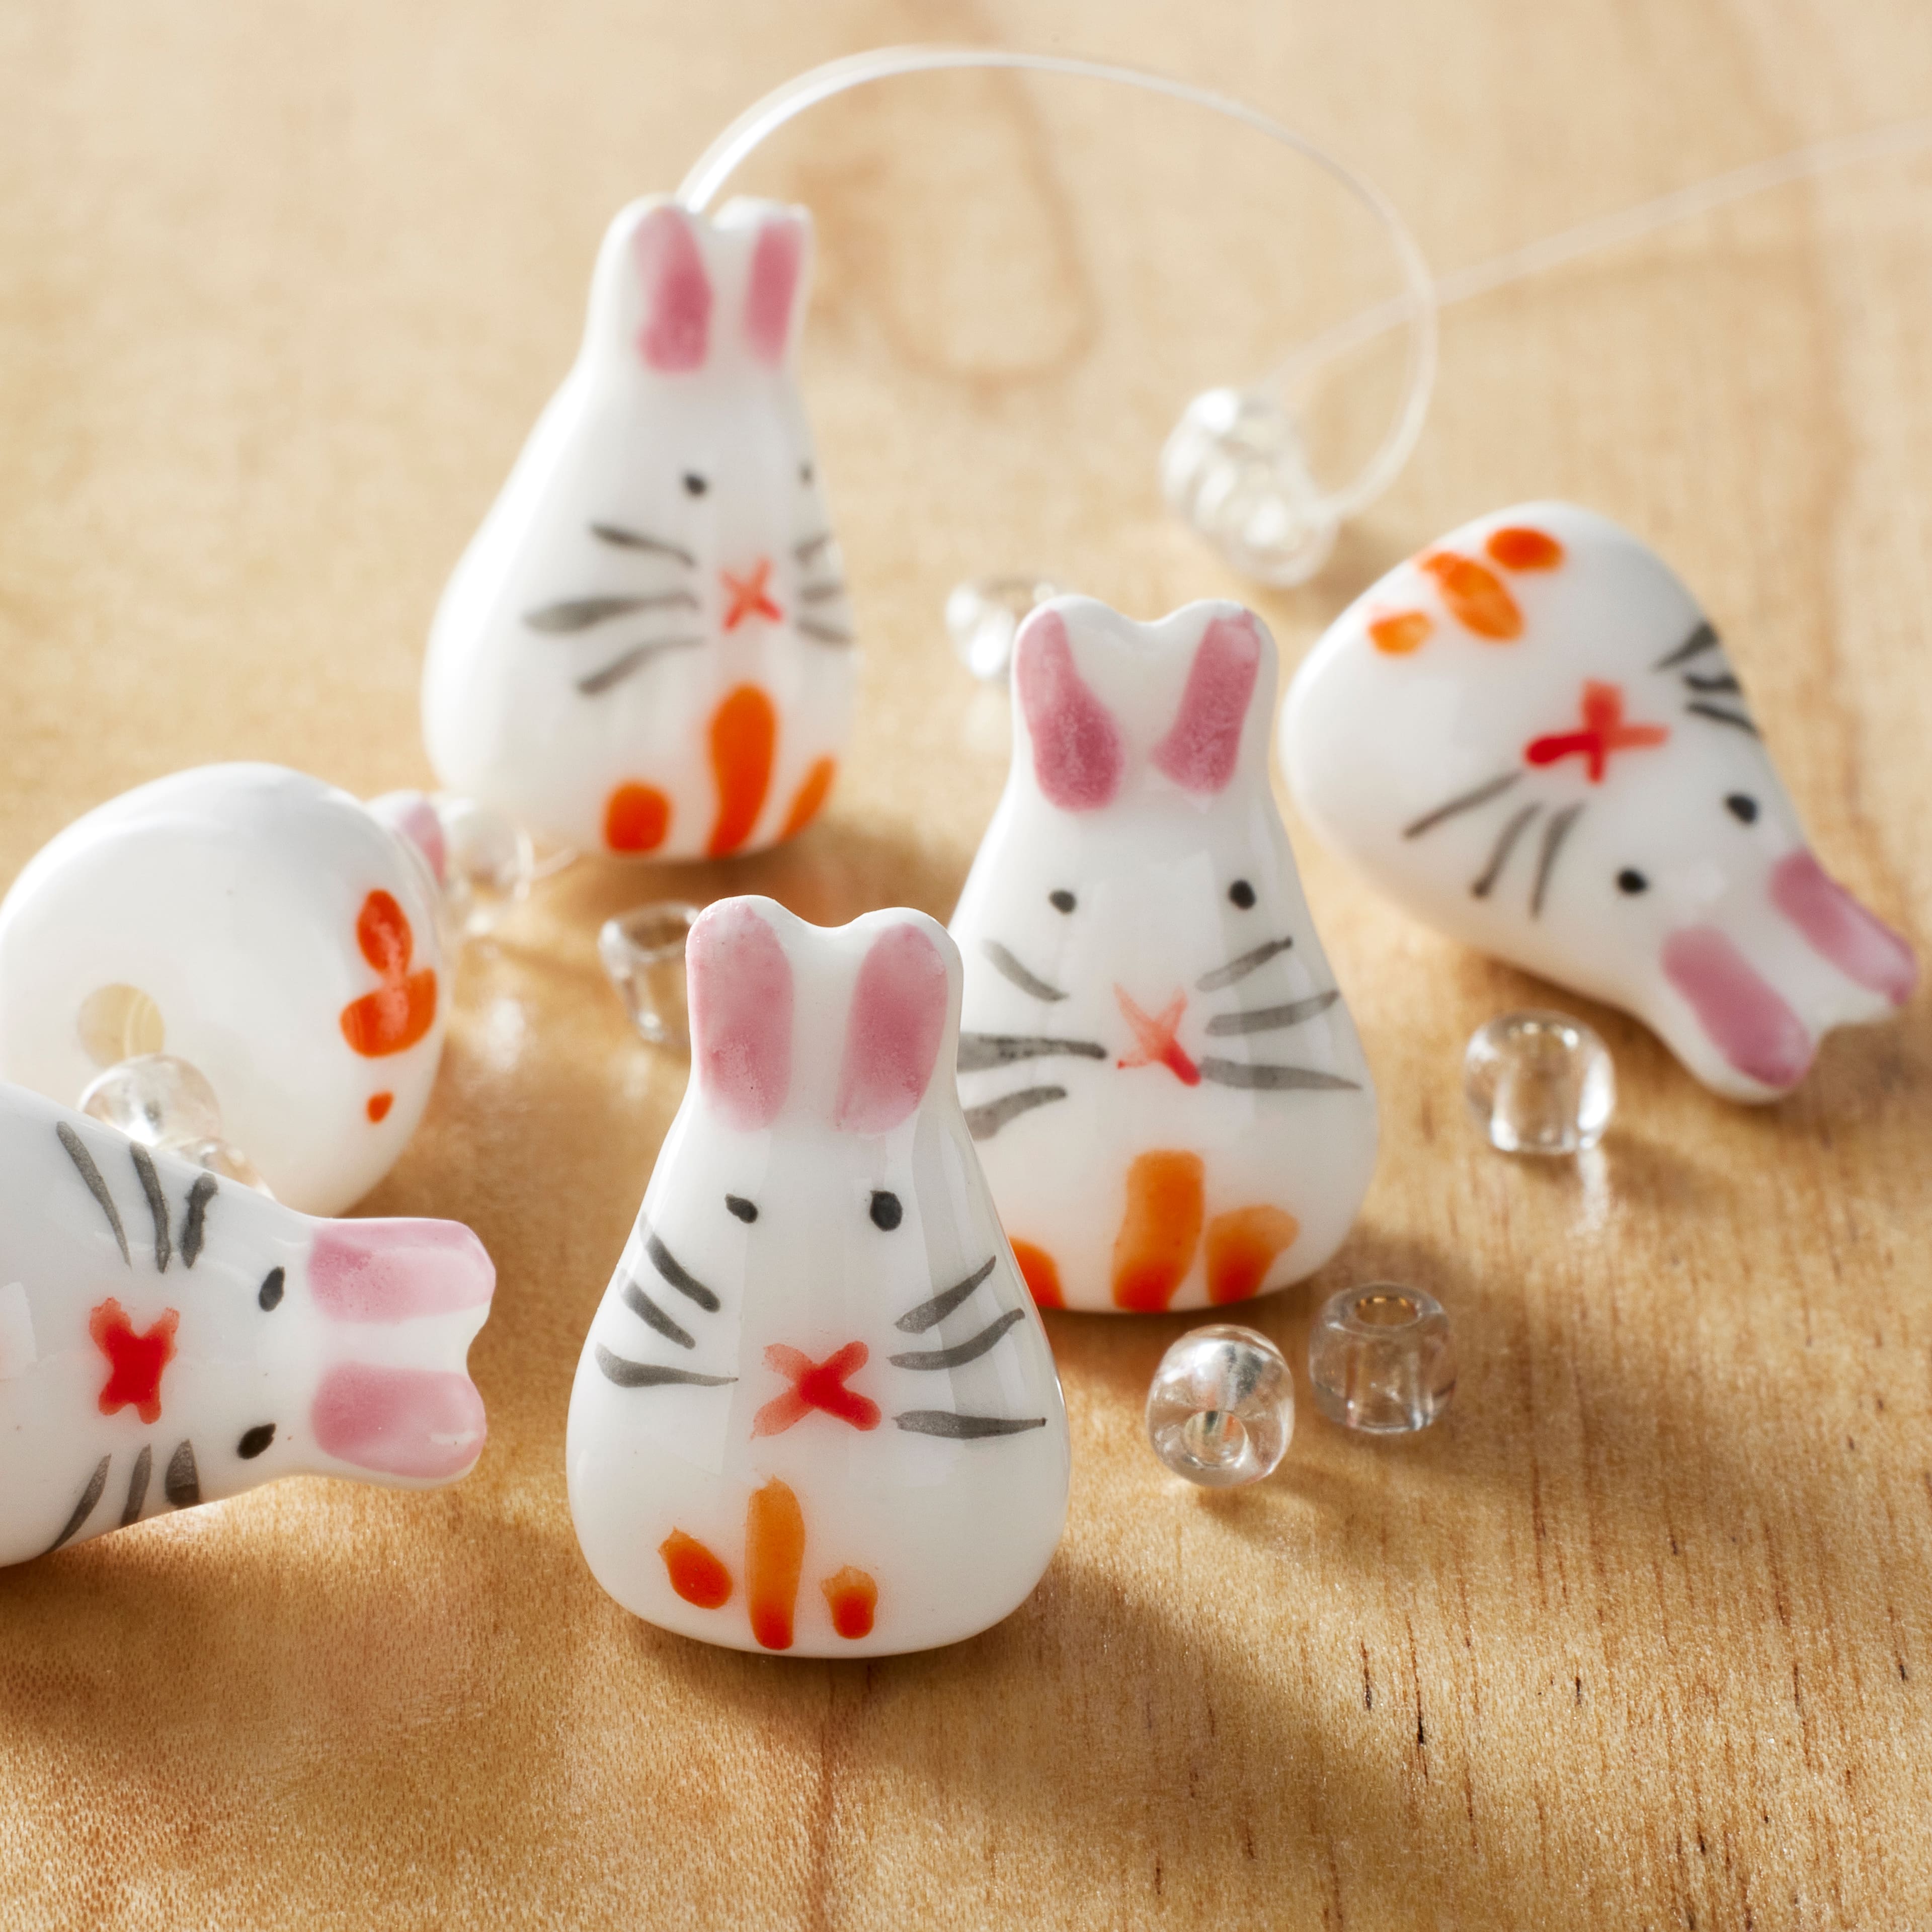 Cute Animal Beads for Jewelry Making - Whales, Bunnies, Rabbits